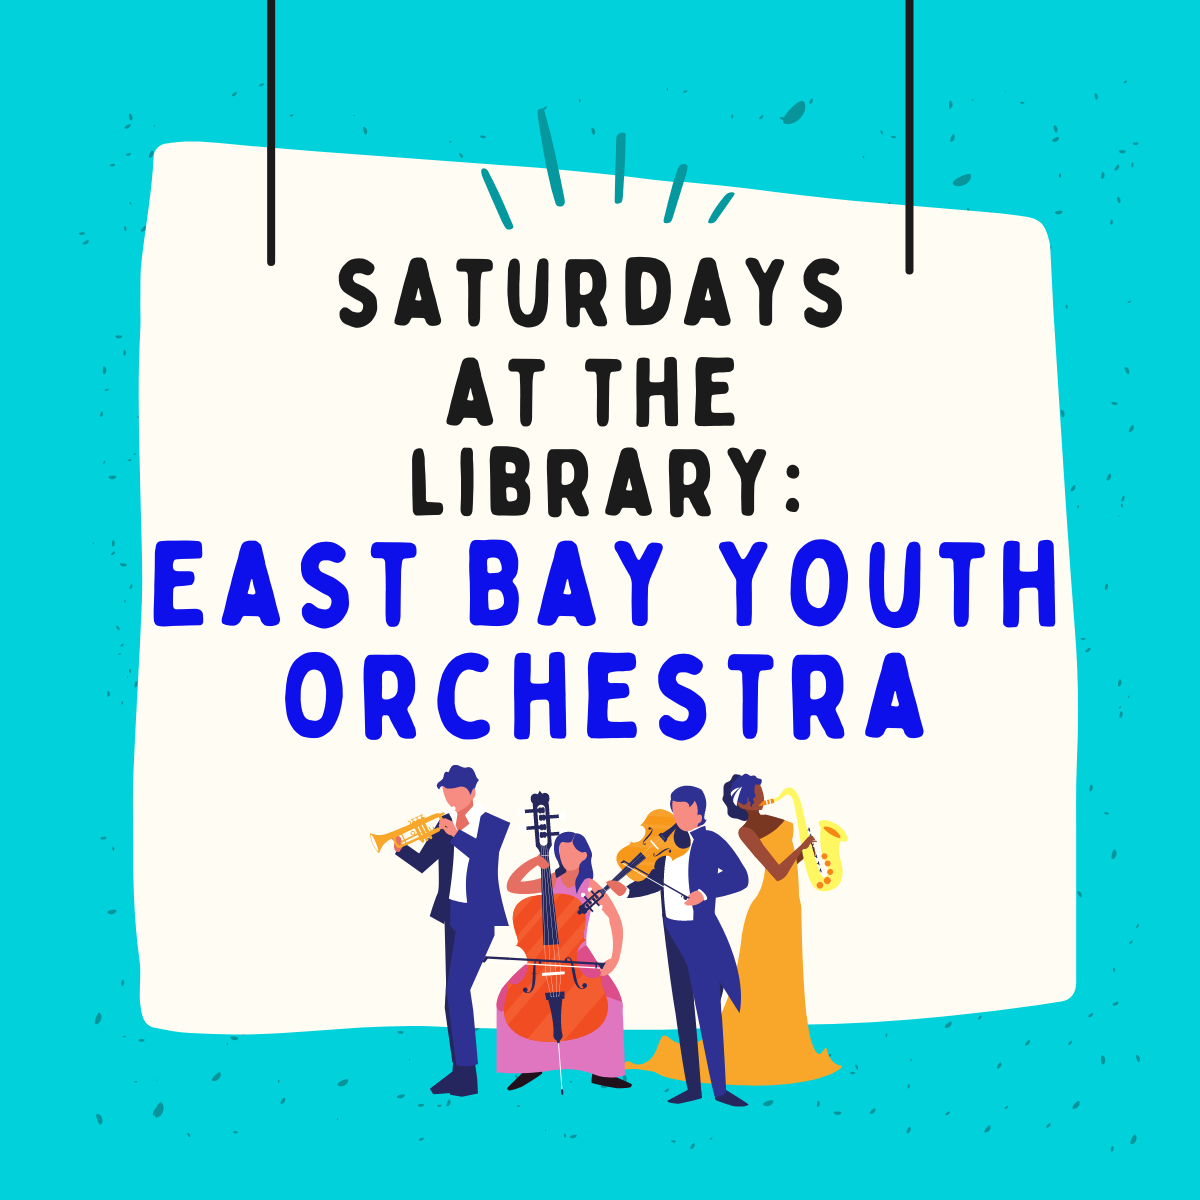 blue background with white square shape in the center, black text reads saturdays at the library. blue text reads east bay youth orchestra. image is of 4 youths playing instruments